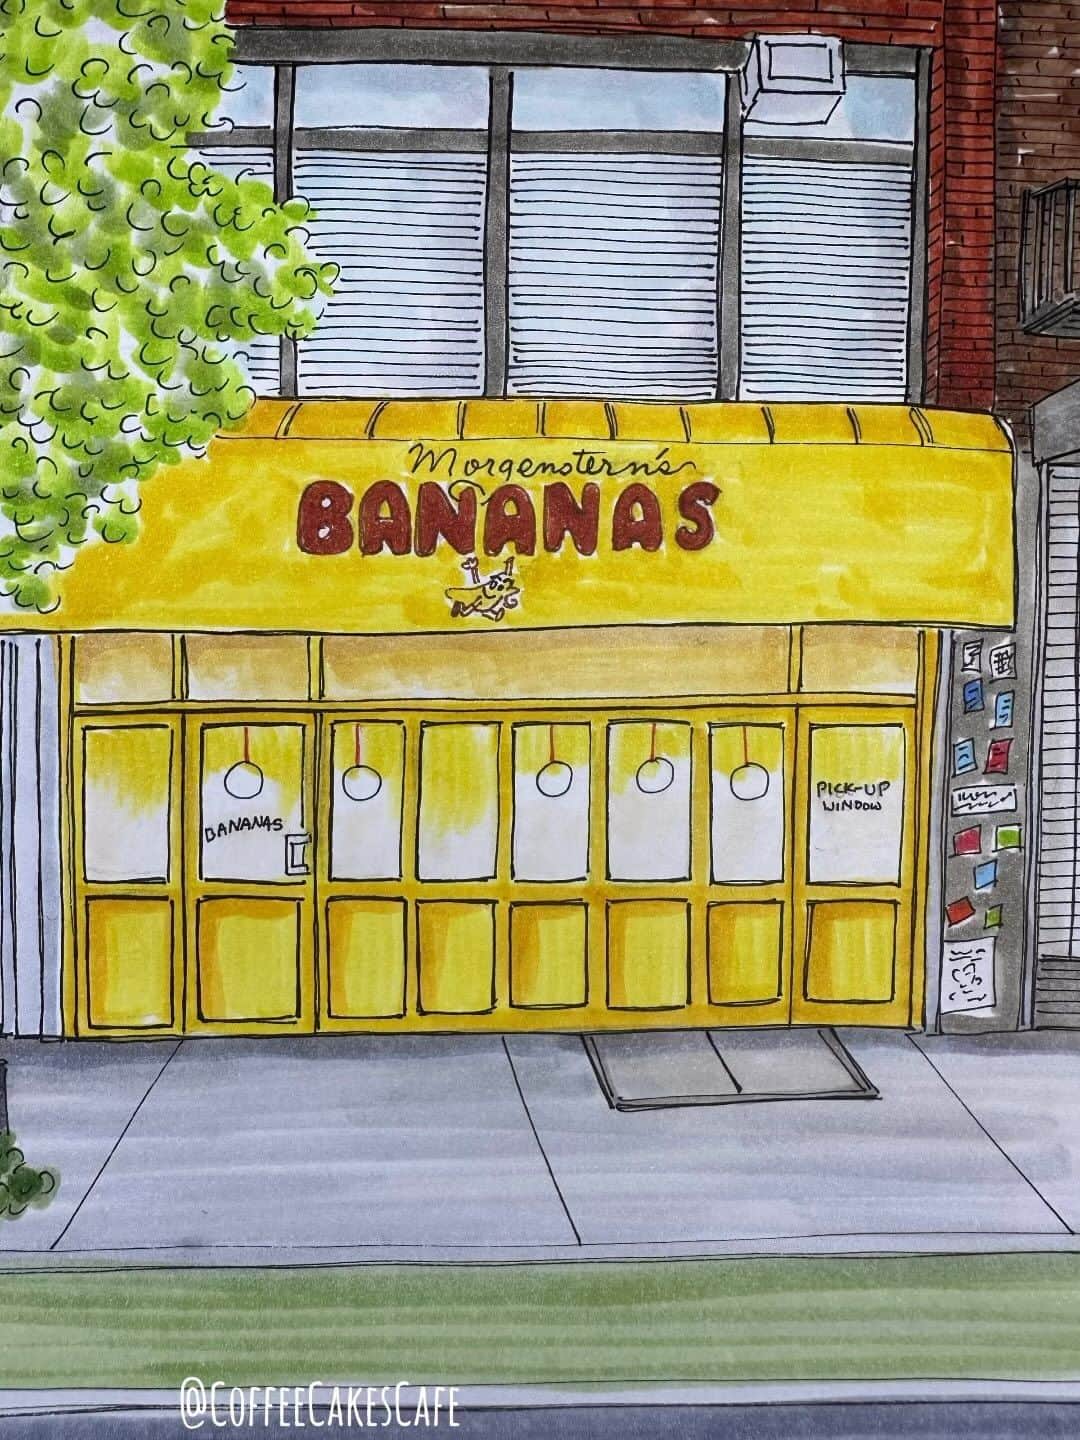 RIASIMのインスタグラム：「I’m bananas over BANANAS!!!🍌🍦Have you visited @morgensternsnyc new vegan soft serve shop called Bananas? I love it and I’ve been here several times ever since they opened! 😁 my favorite flavors are the coconut vanilla (hope they will bring this flavor back), super chocolate is yummy, vanilla banana is really good too, recently tried the coconut Thai iced tea and the ube cookies and cream. I have yet to try the coffee (sold out yesterday). If you happen to be in the area, pop in! You can’t miss this bright yellow shop located on 2 Rivington! 💛 . Enjoy the new week everyone! Happy Monday!  . . . . . . . . #morgensternsnyc #morgensternsfinesticecream #storefrontcollective #bowerynyc #prettycitynewyork #stopmotion #coffeecakescafe #westvillagelife #westvillage #westvillagenyc #nycicecream #newyorkicecream #vegan #veganfood #veganicecream #made_in_ny」